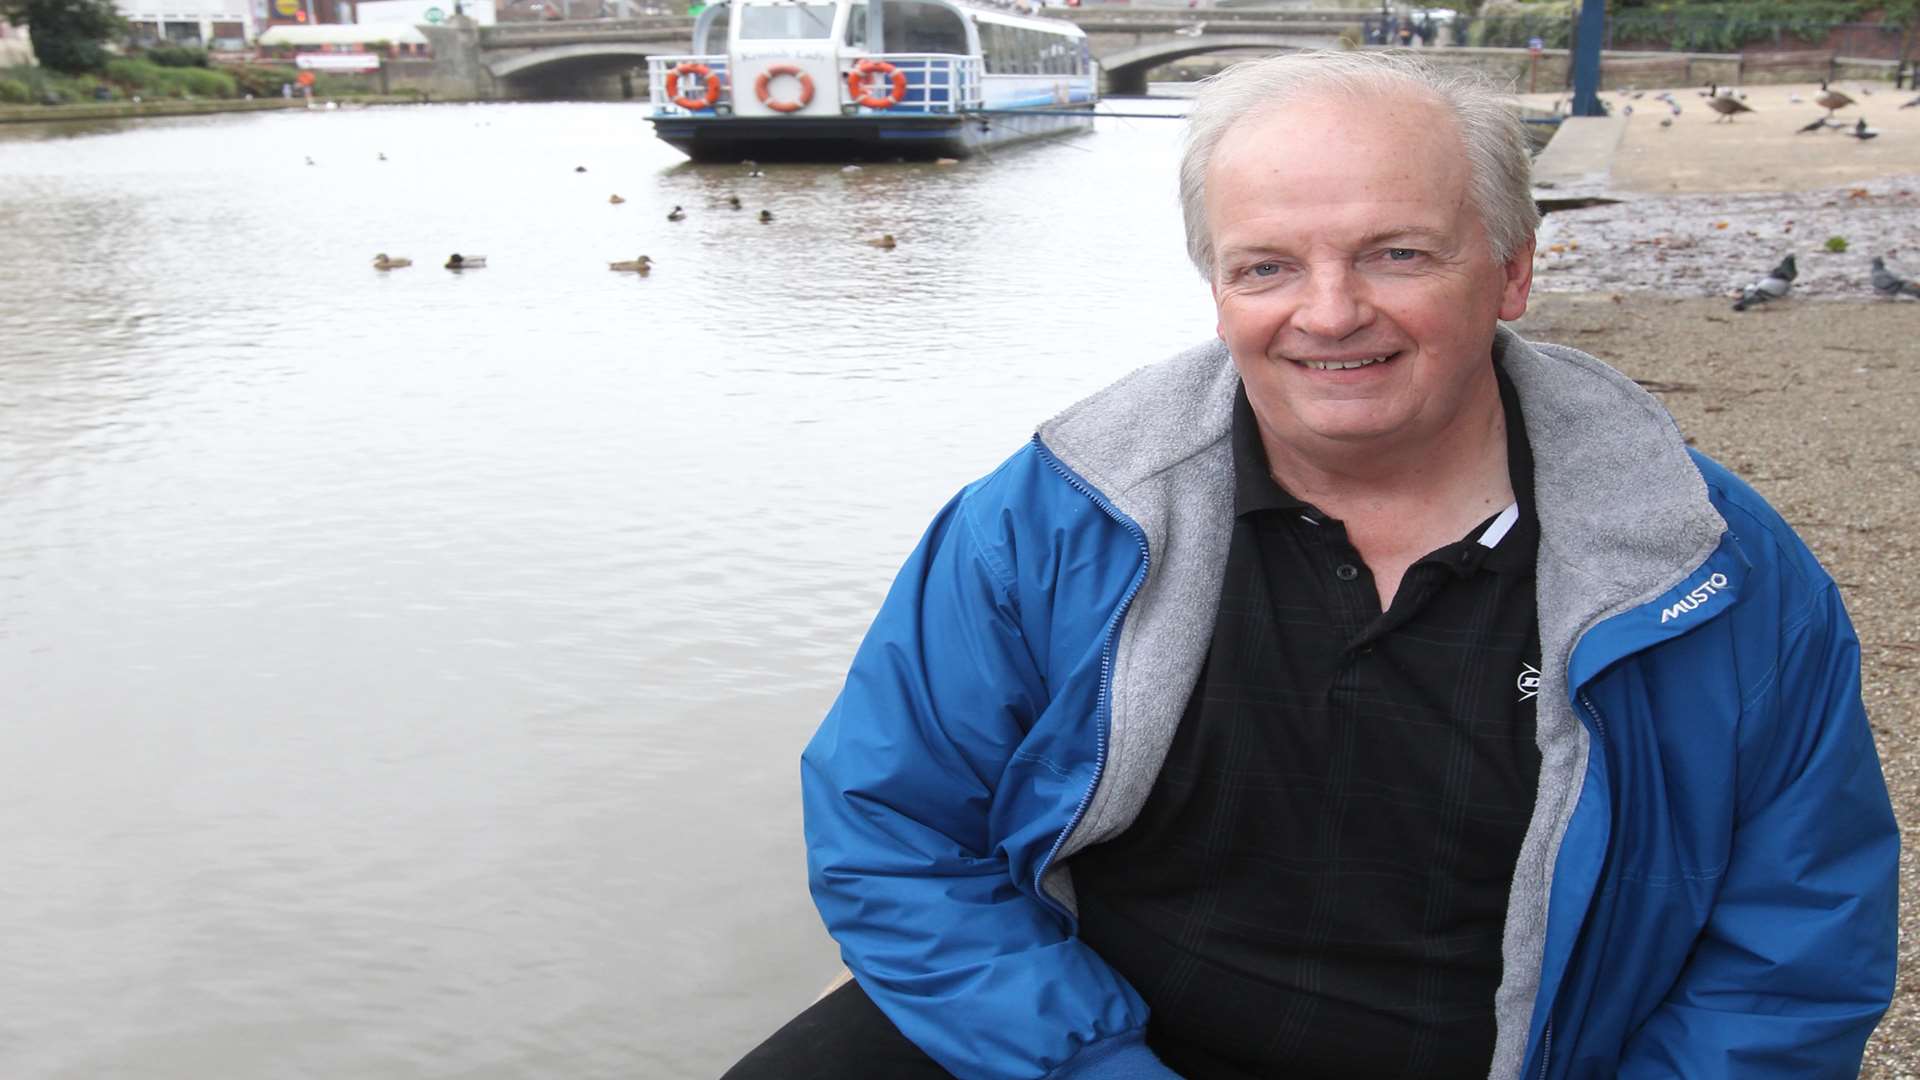 Dave Grant at the water edge, where he dived in to save a man who fell in